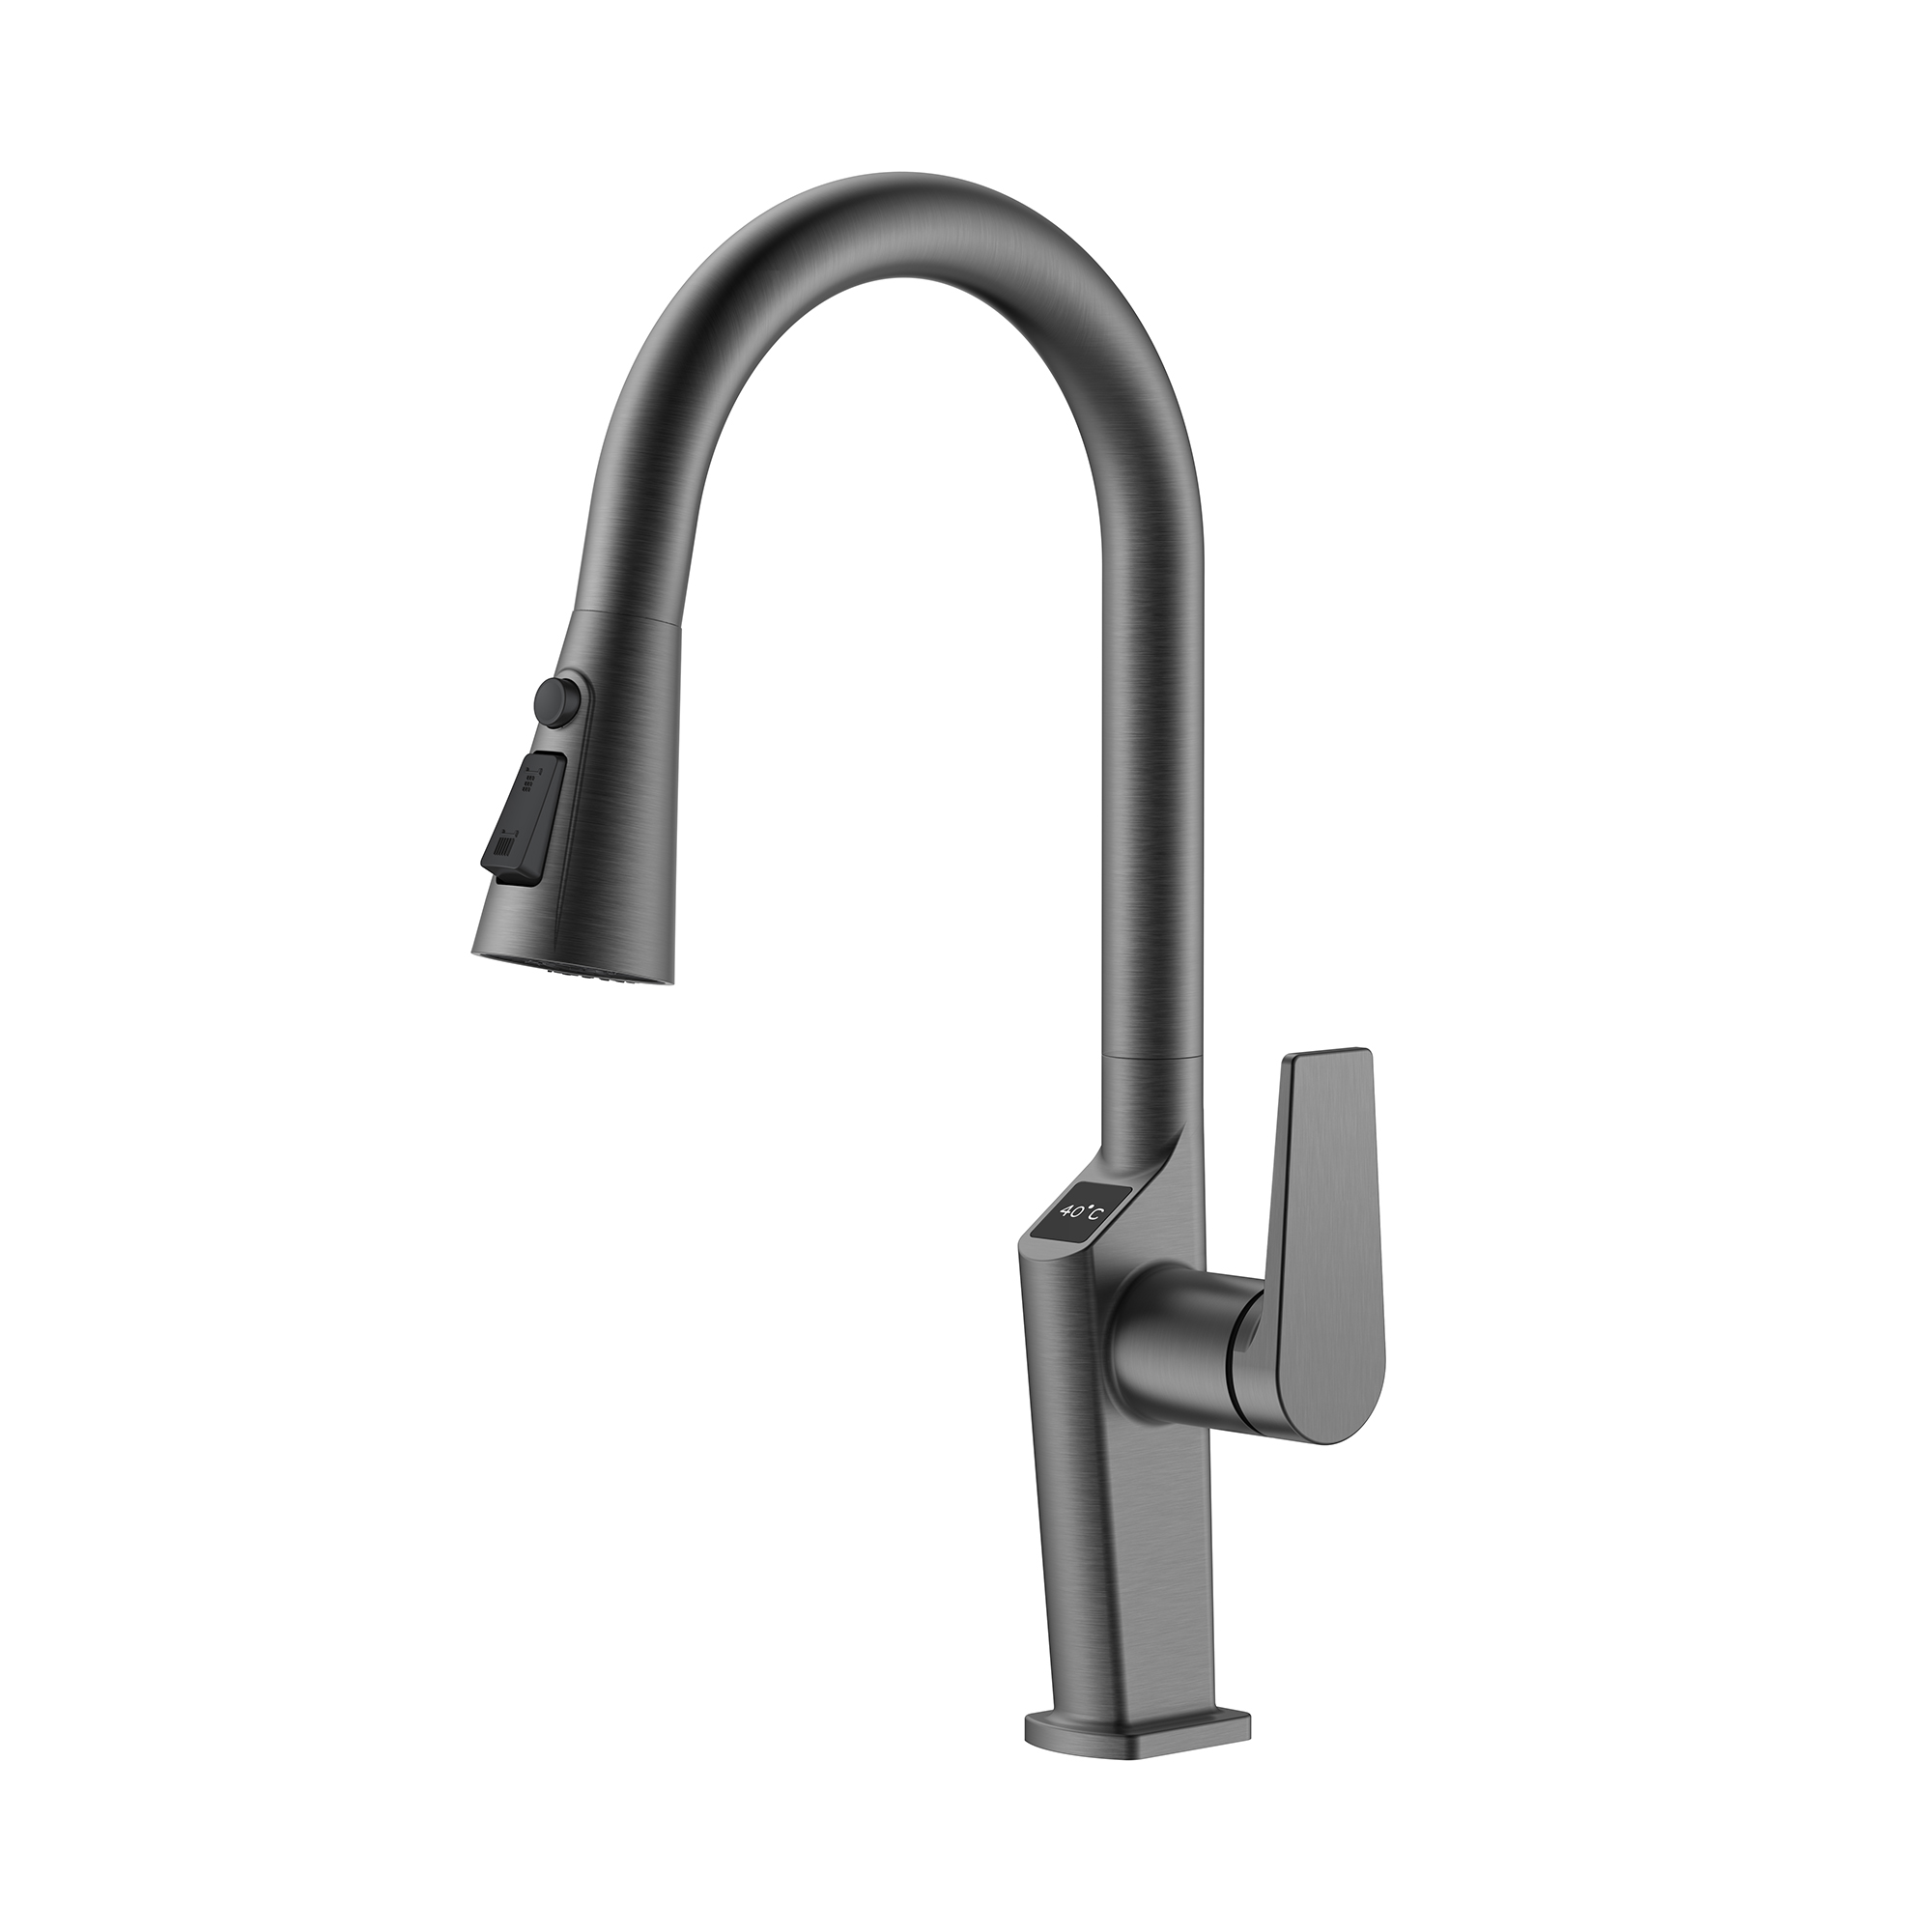 Gun Metal Hydroelectric Temperature Display Kitchen Faucets Pull Down Kitchen Faucet